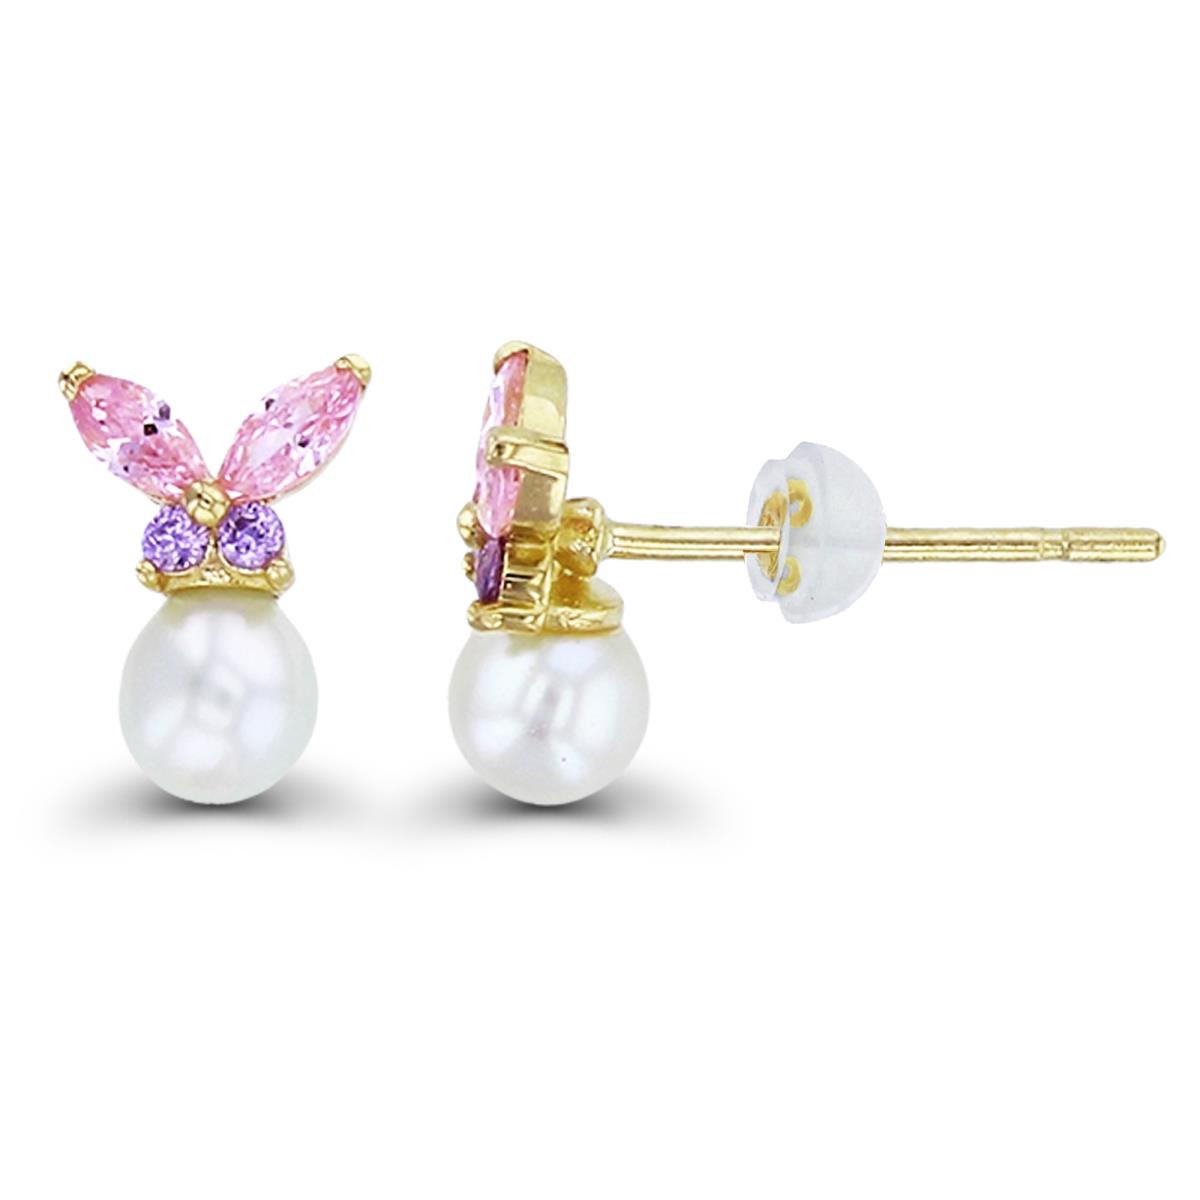 10K Yellow Gold Rnd Amethyst CZ & MQ Pink CZ Butterfly on Rnd Pearl Studs with Silicon Backs